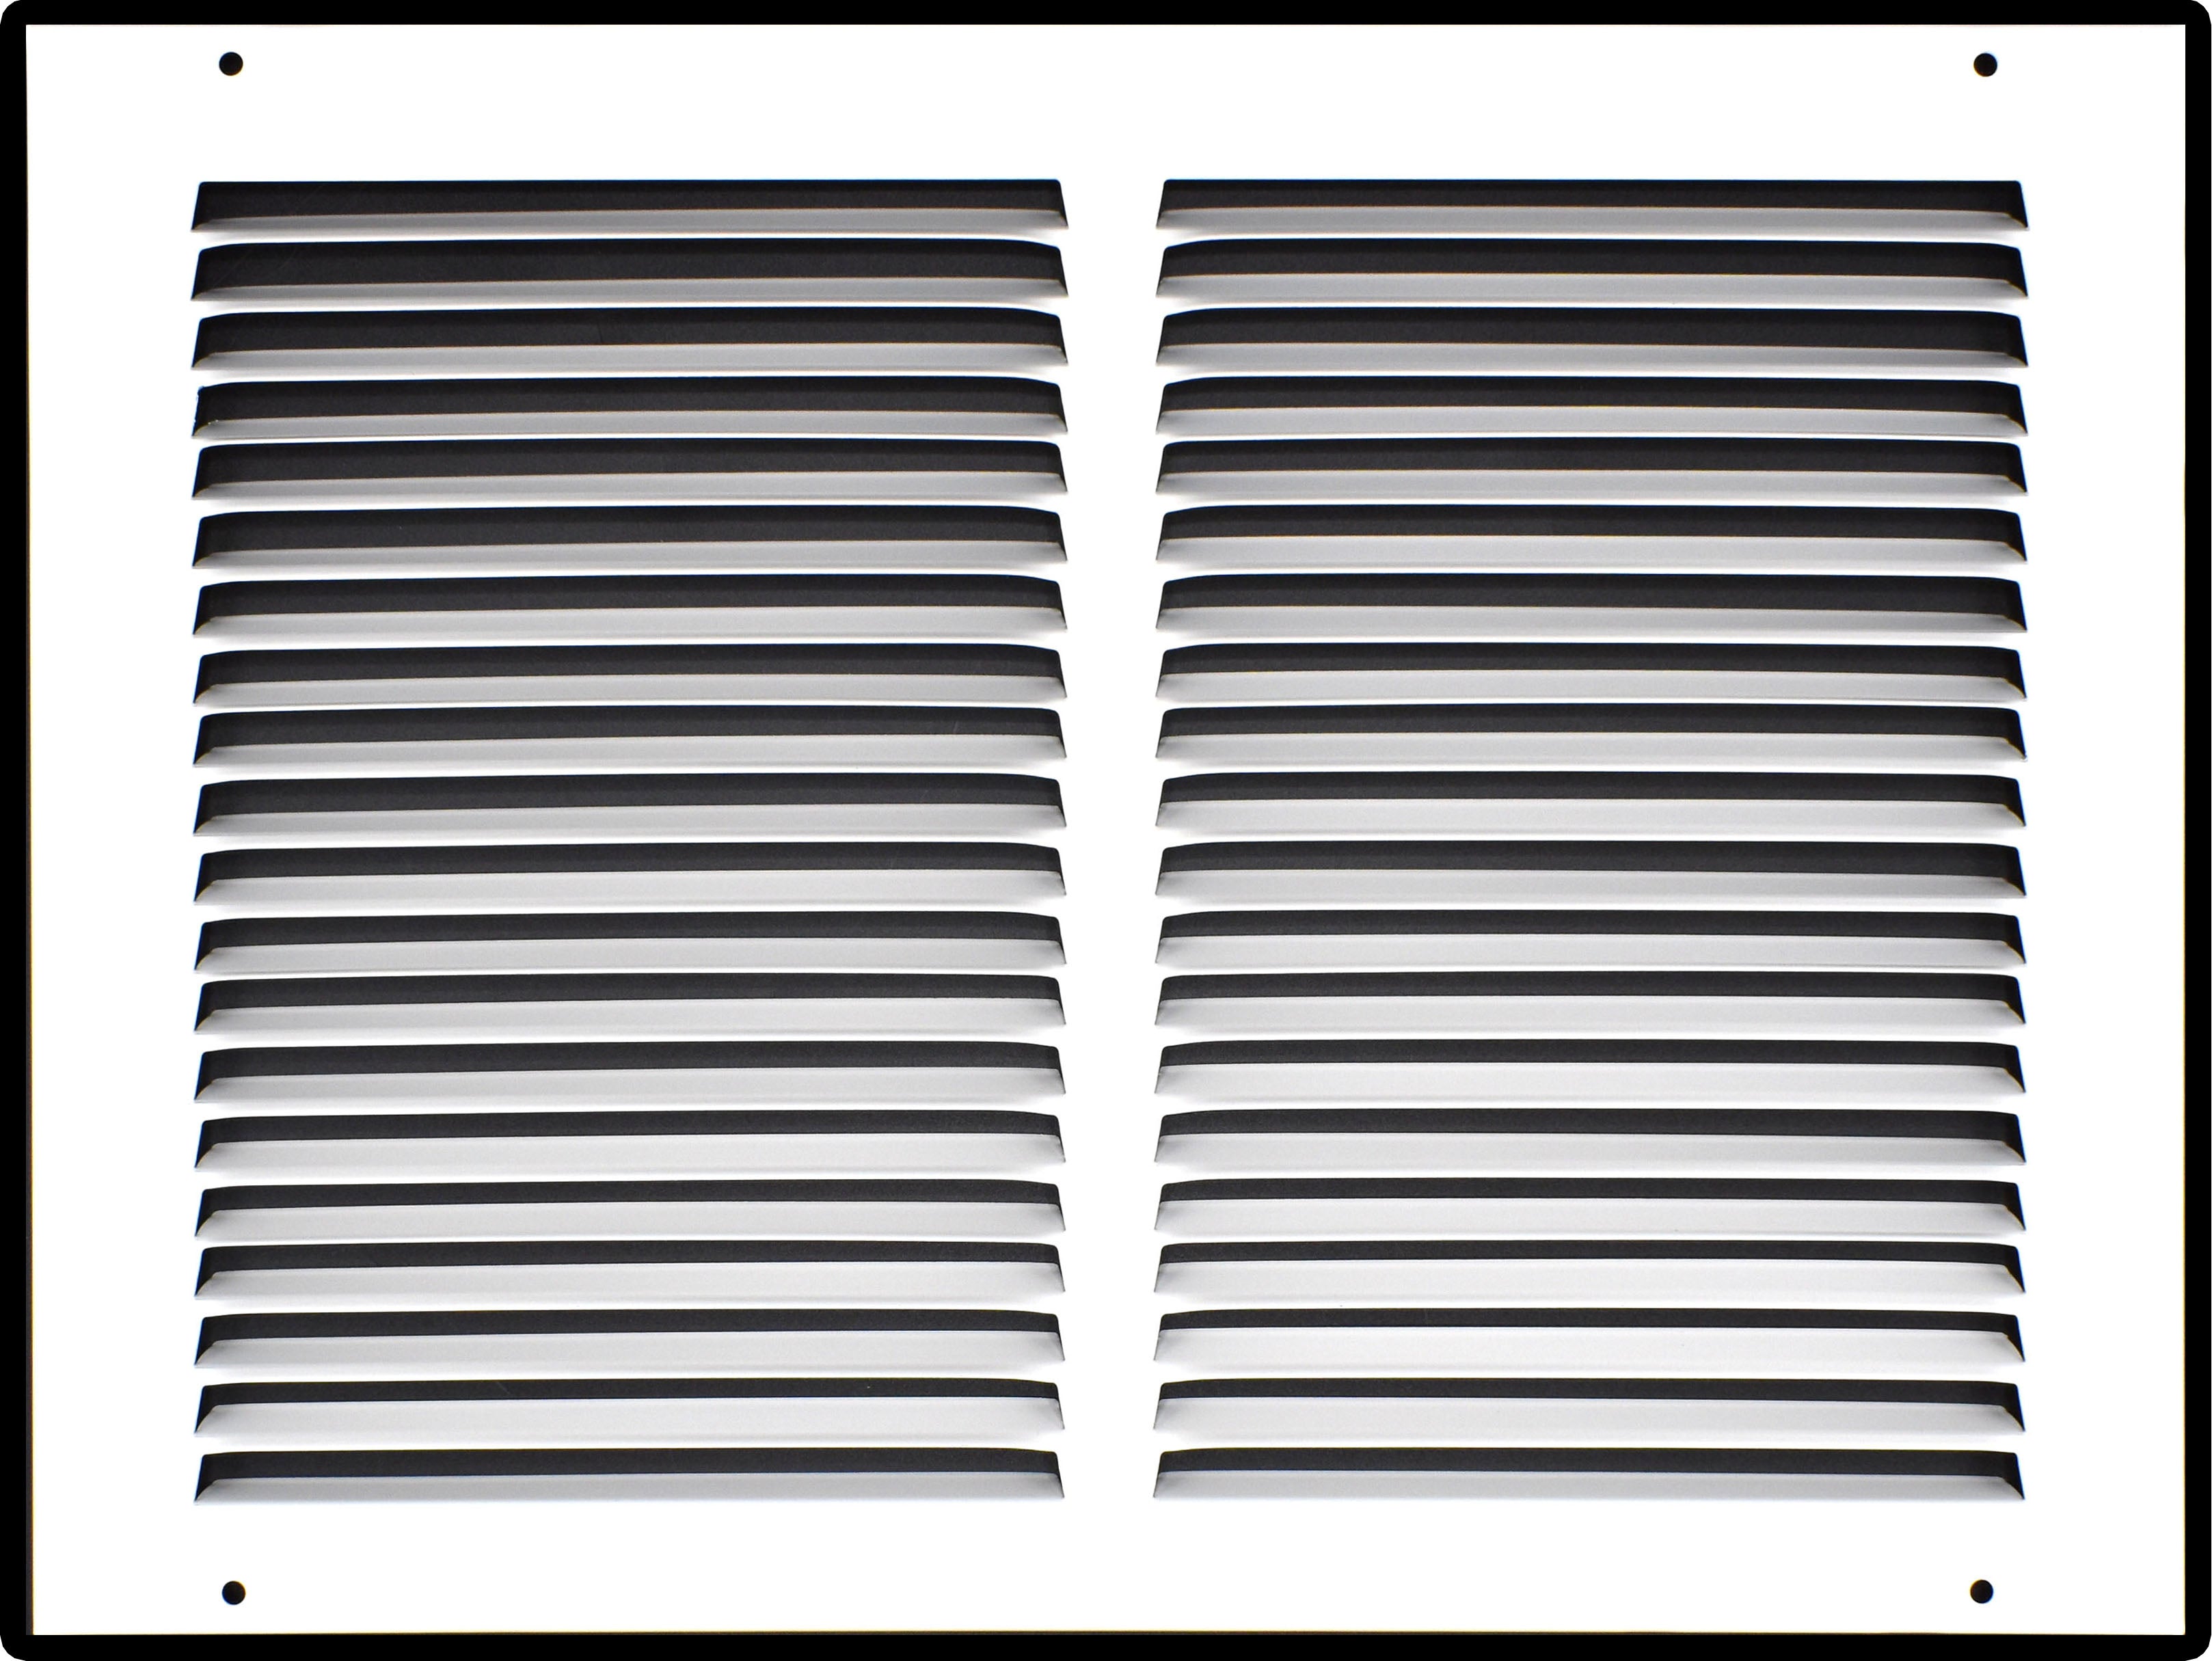 airgrilles 14" x 10" duct opening  -  hd steel return air grille for sidewall and ceiling 7hnd-flt-rg-wh-14x10 038775640602 - 1